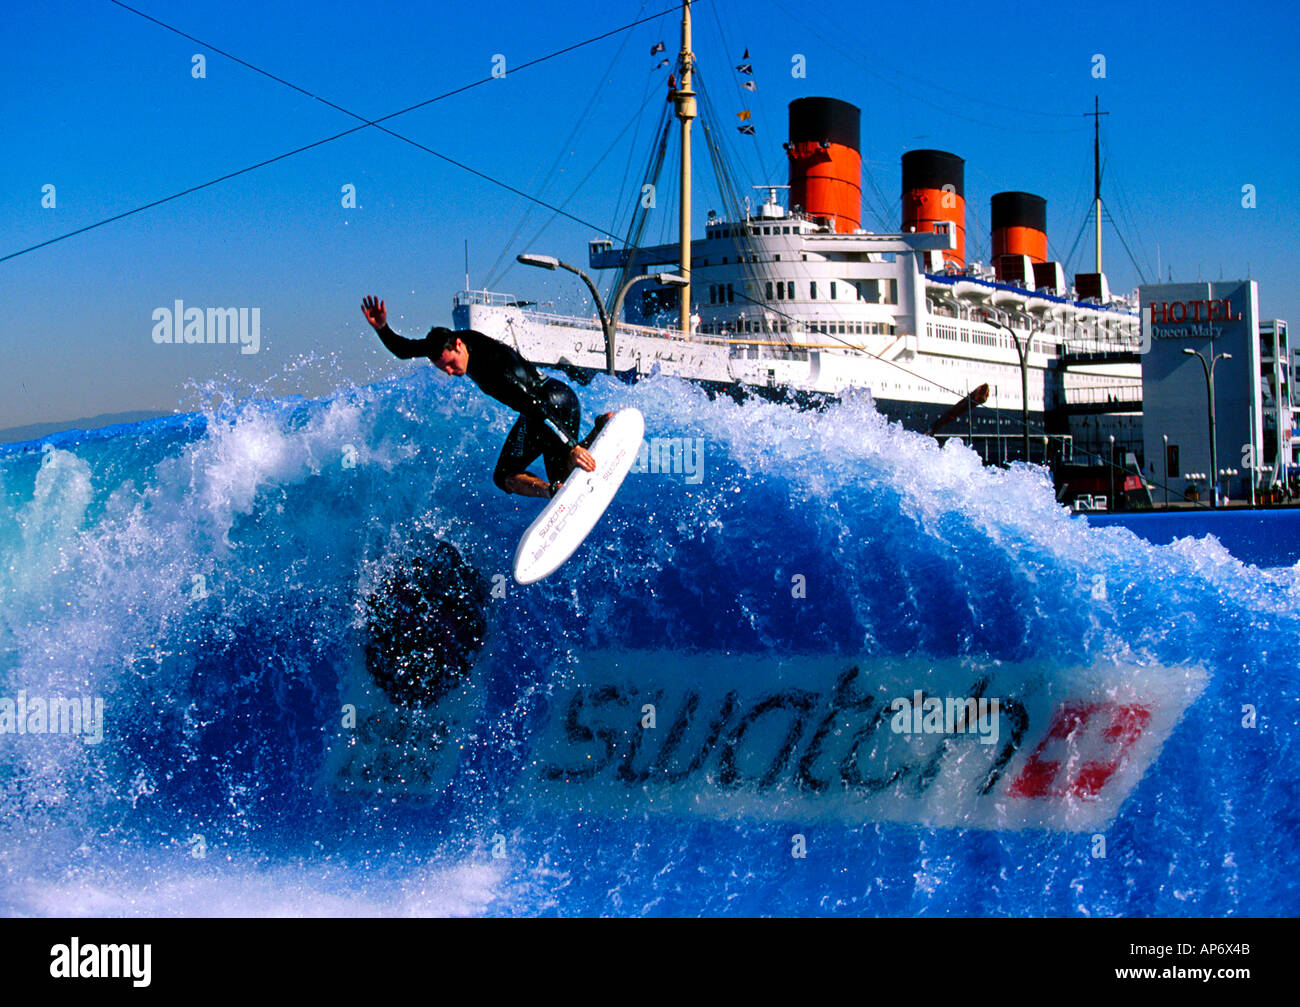 Surfing on artificial waves Longbeach, California, USA. With Cunard RMS Queen Mary in background and Swatch logo Stock Photo